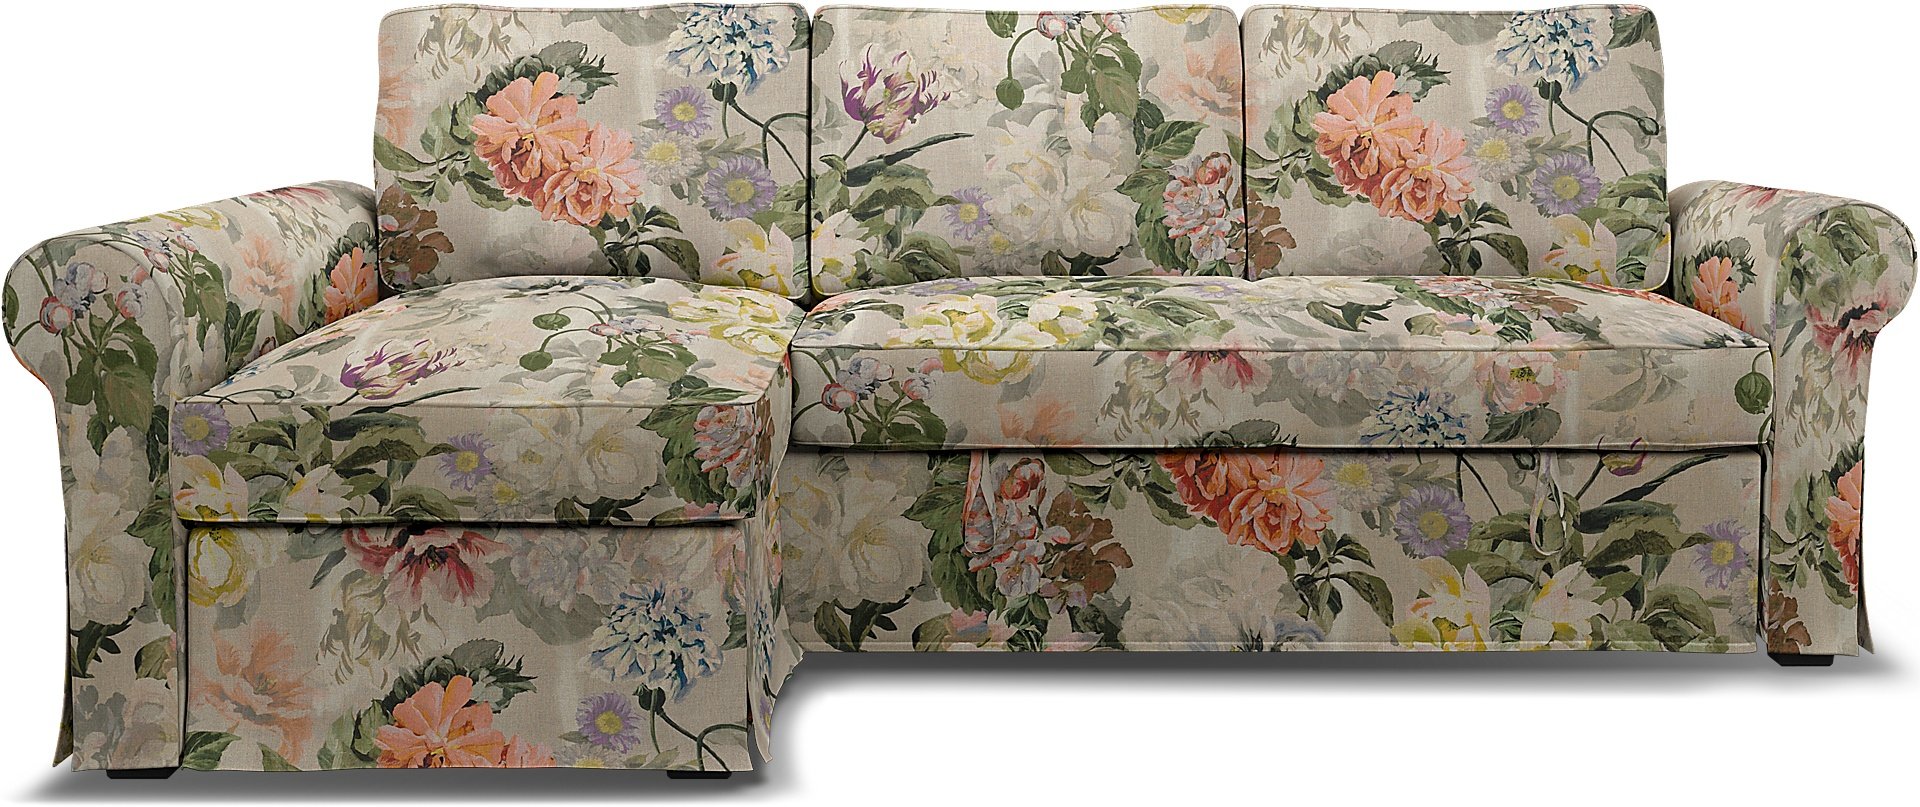 IKEA - Backabro Sofabed with Chaise Cover, Delft Flower - Tuberose, Linen - Bemz